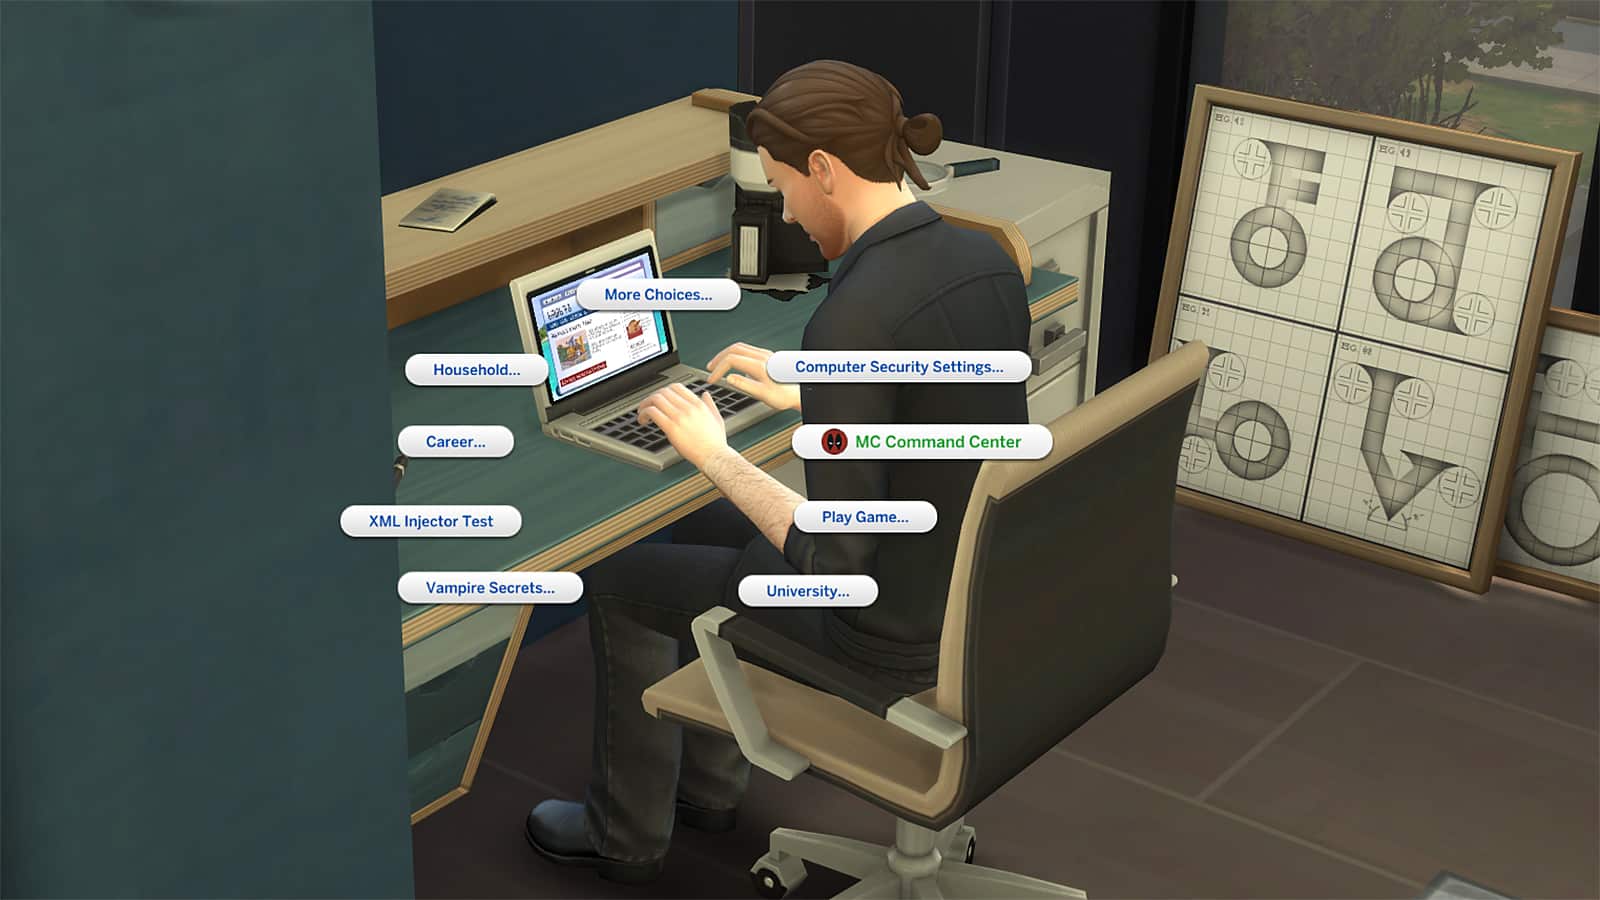 A screenshot showing the pie menu for MC Command Center in The Sims 4